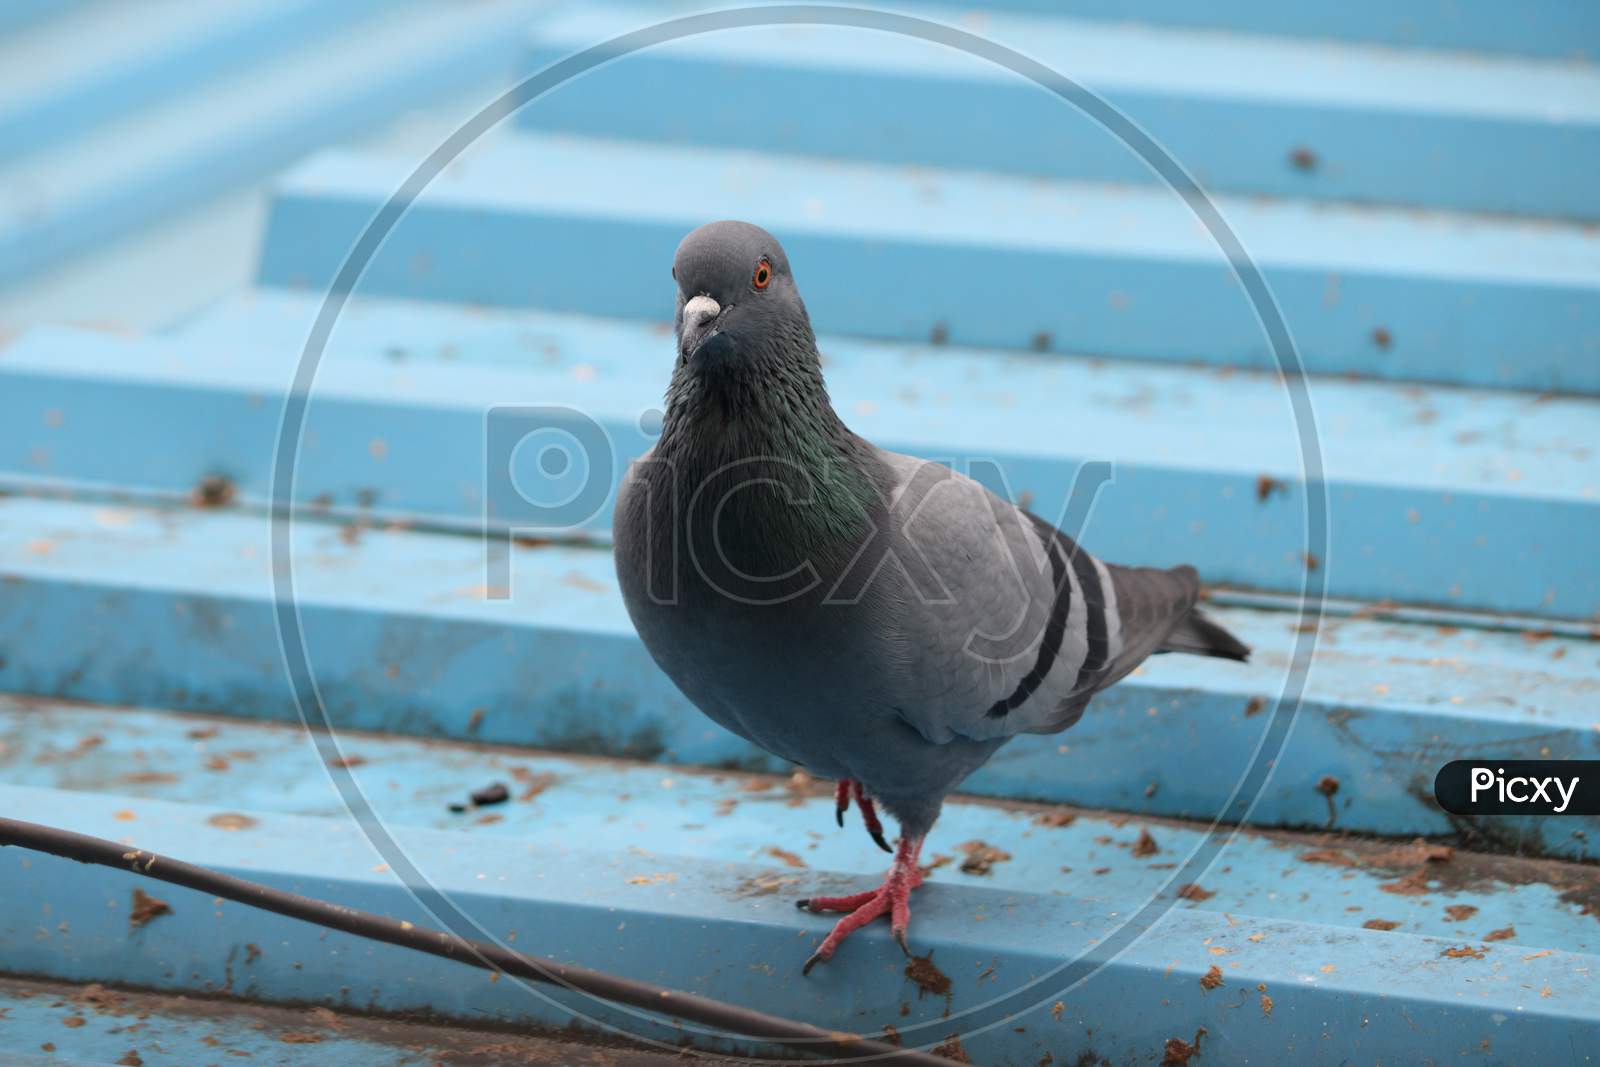 Pigeon searching for food